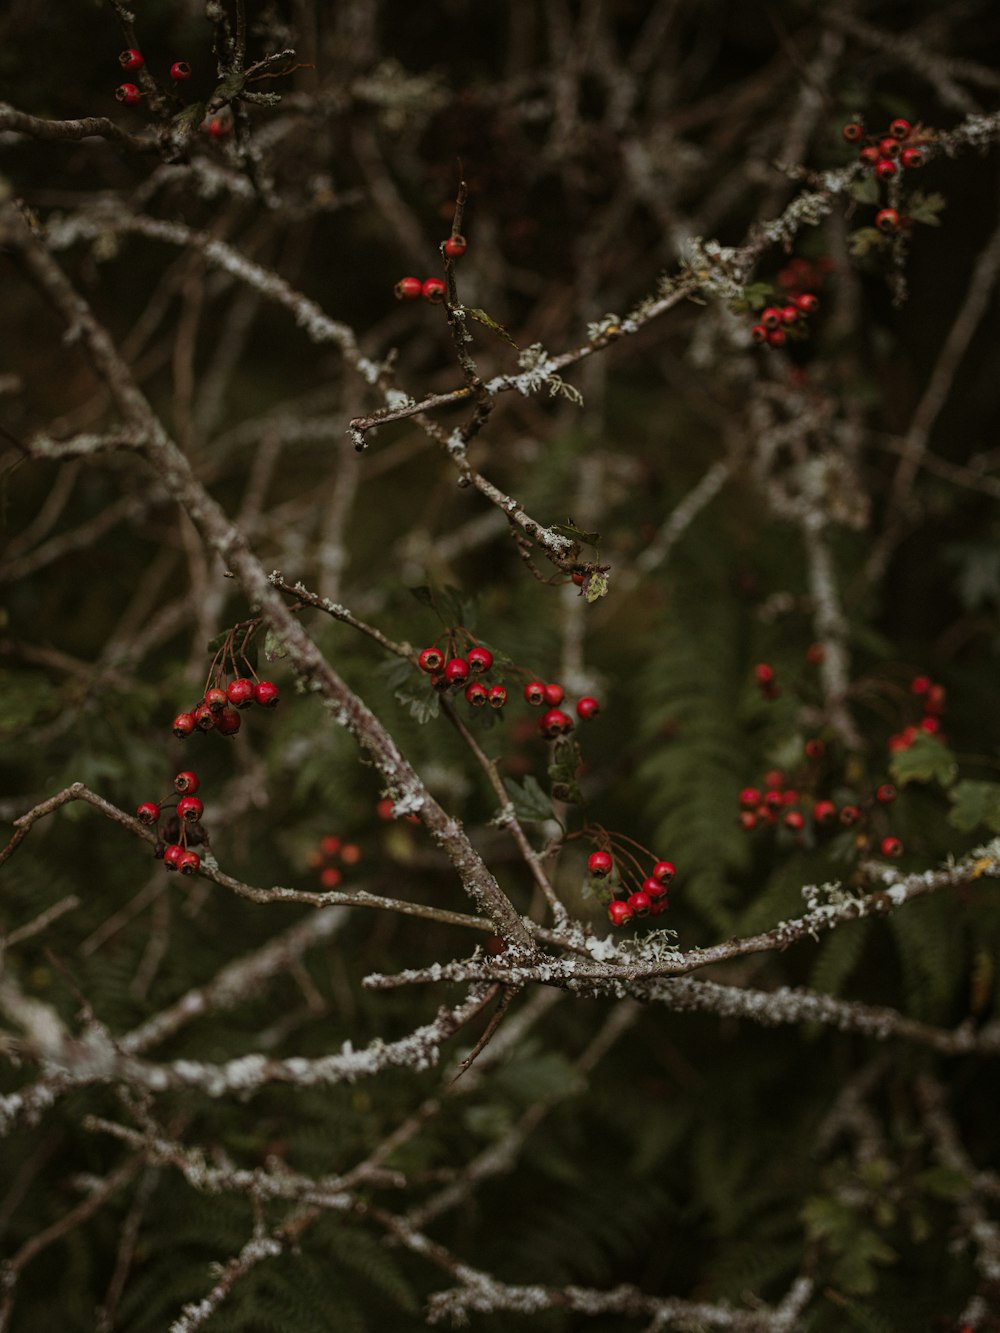 a small branch with red berries on it